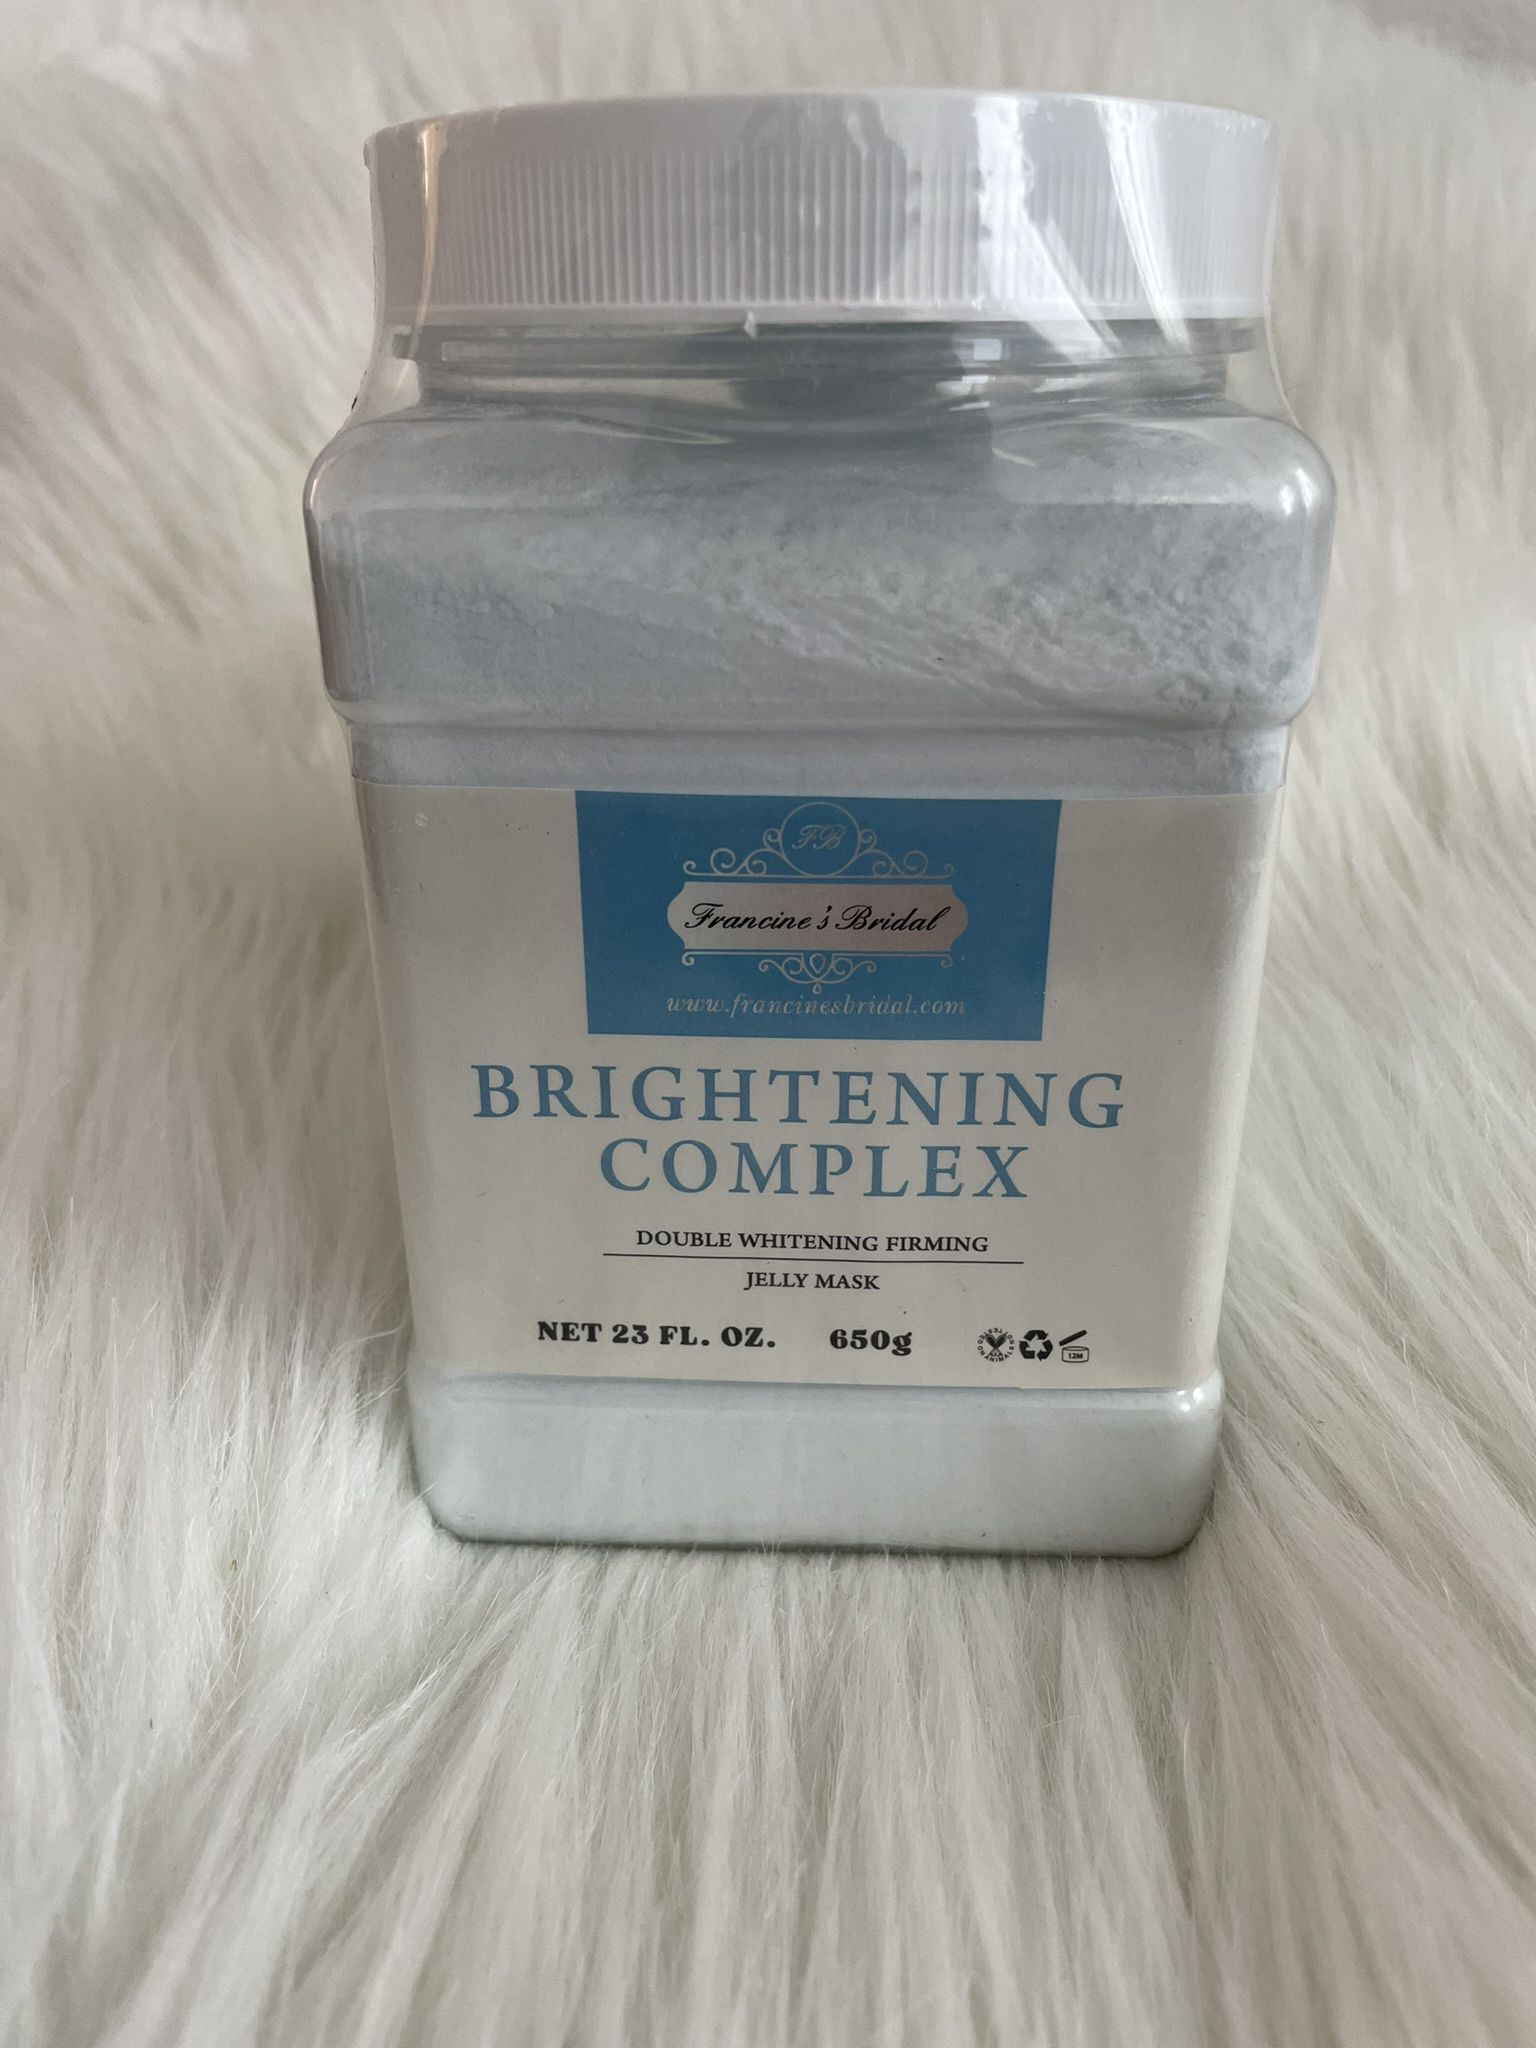 New Brightening Complex Jelly Face Mask 